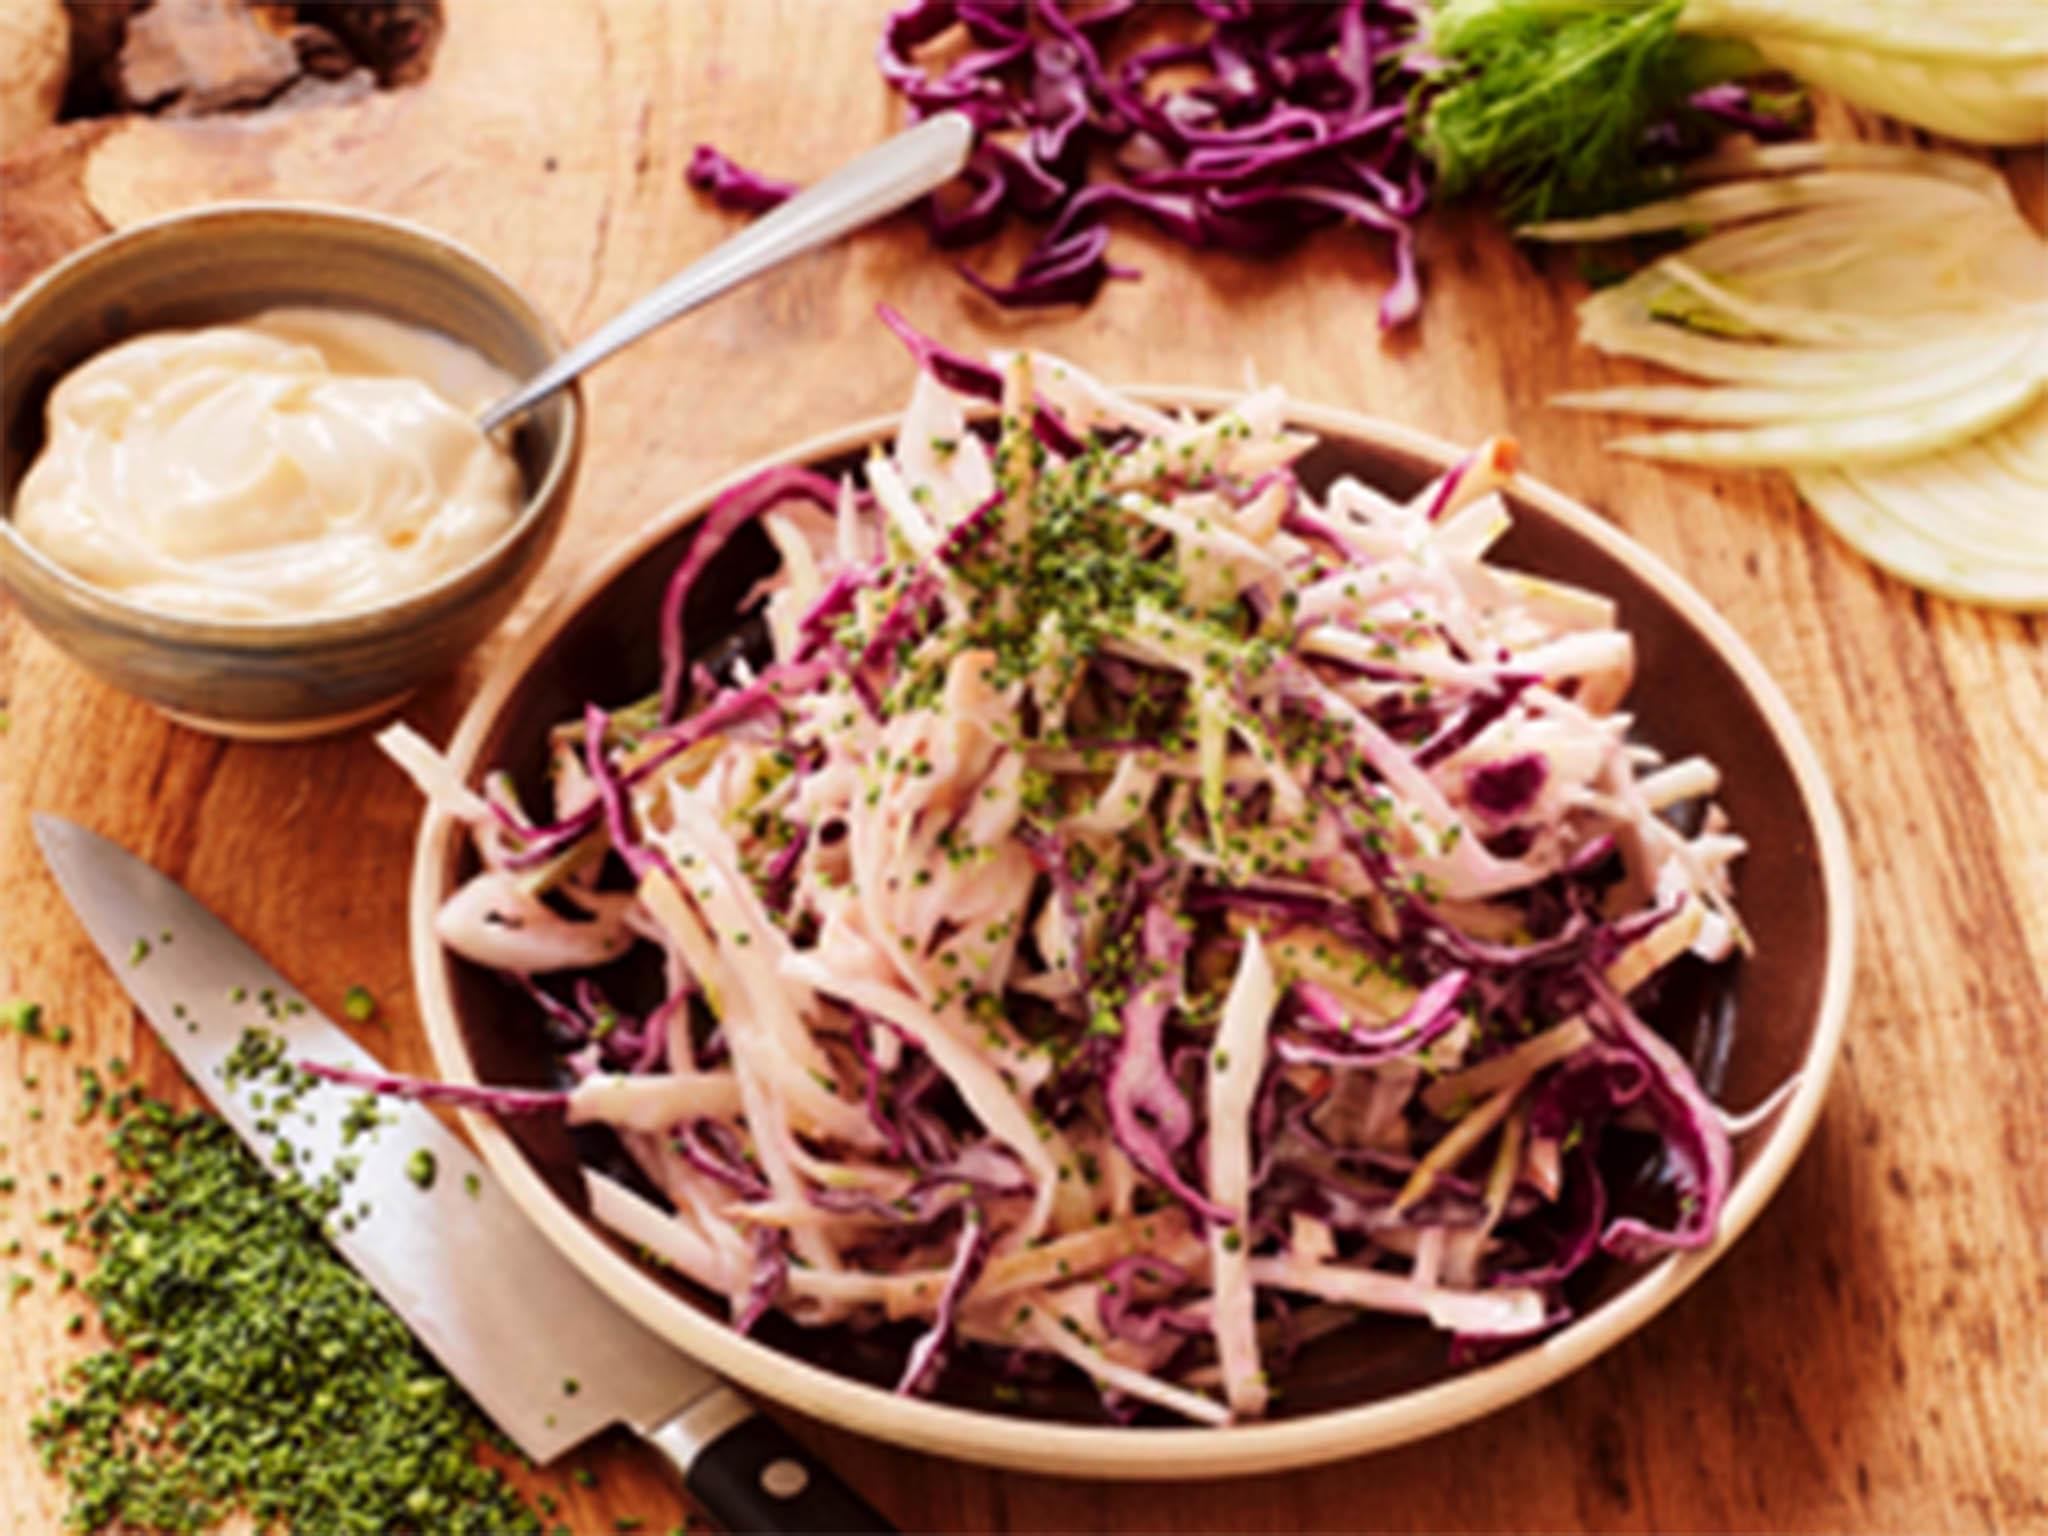 Serve up some slaw – the perfect side dish from the south